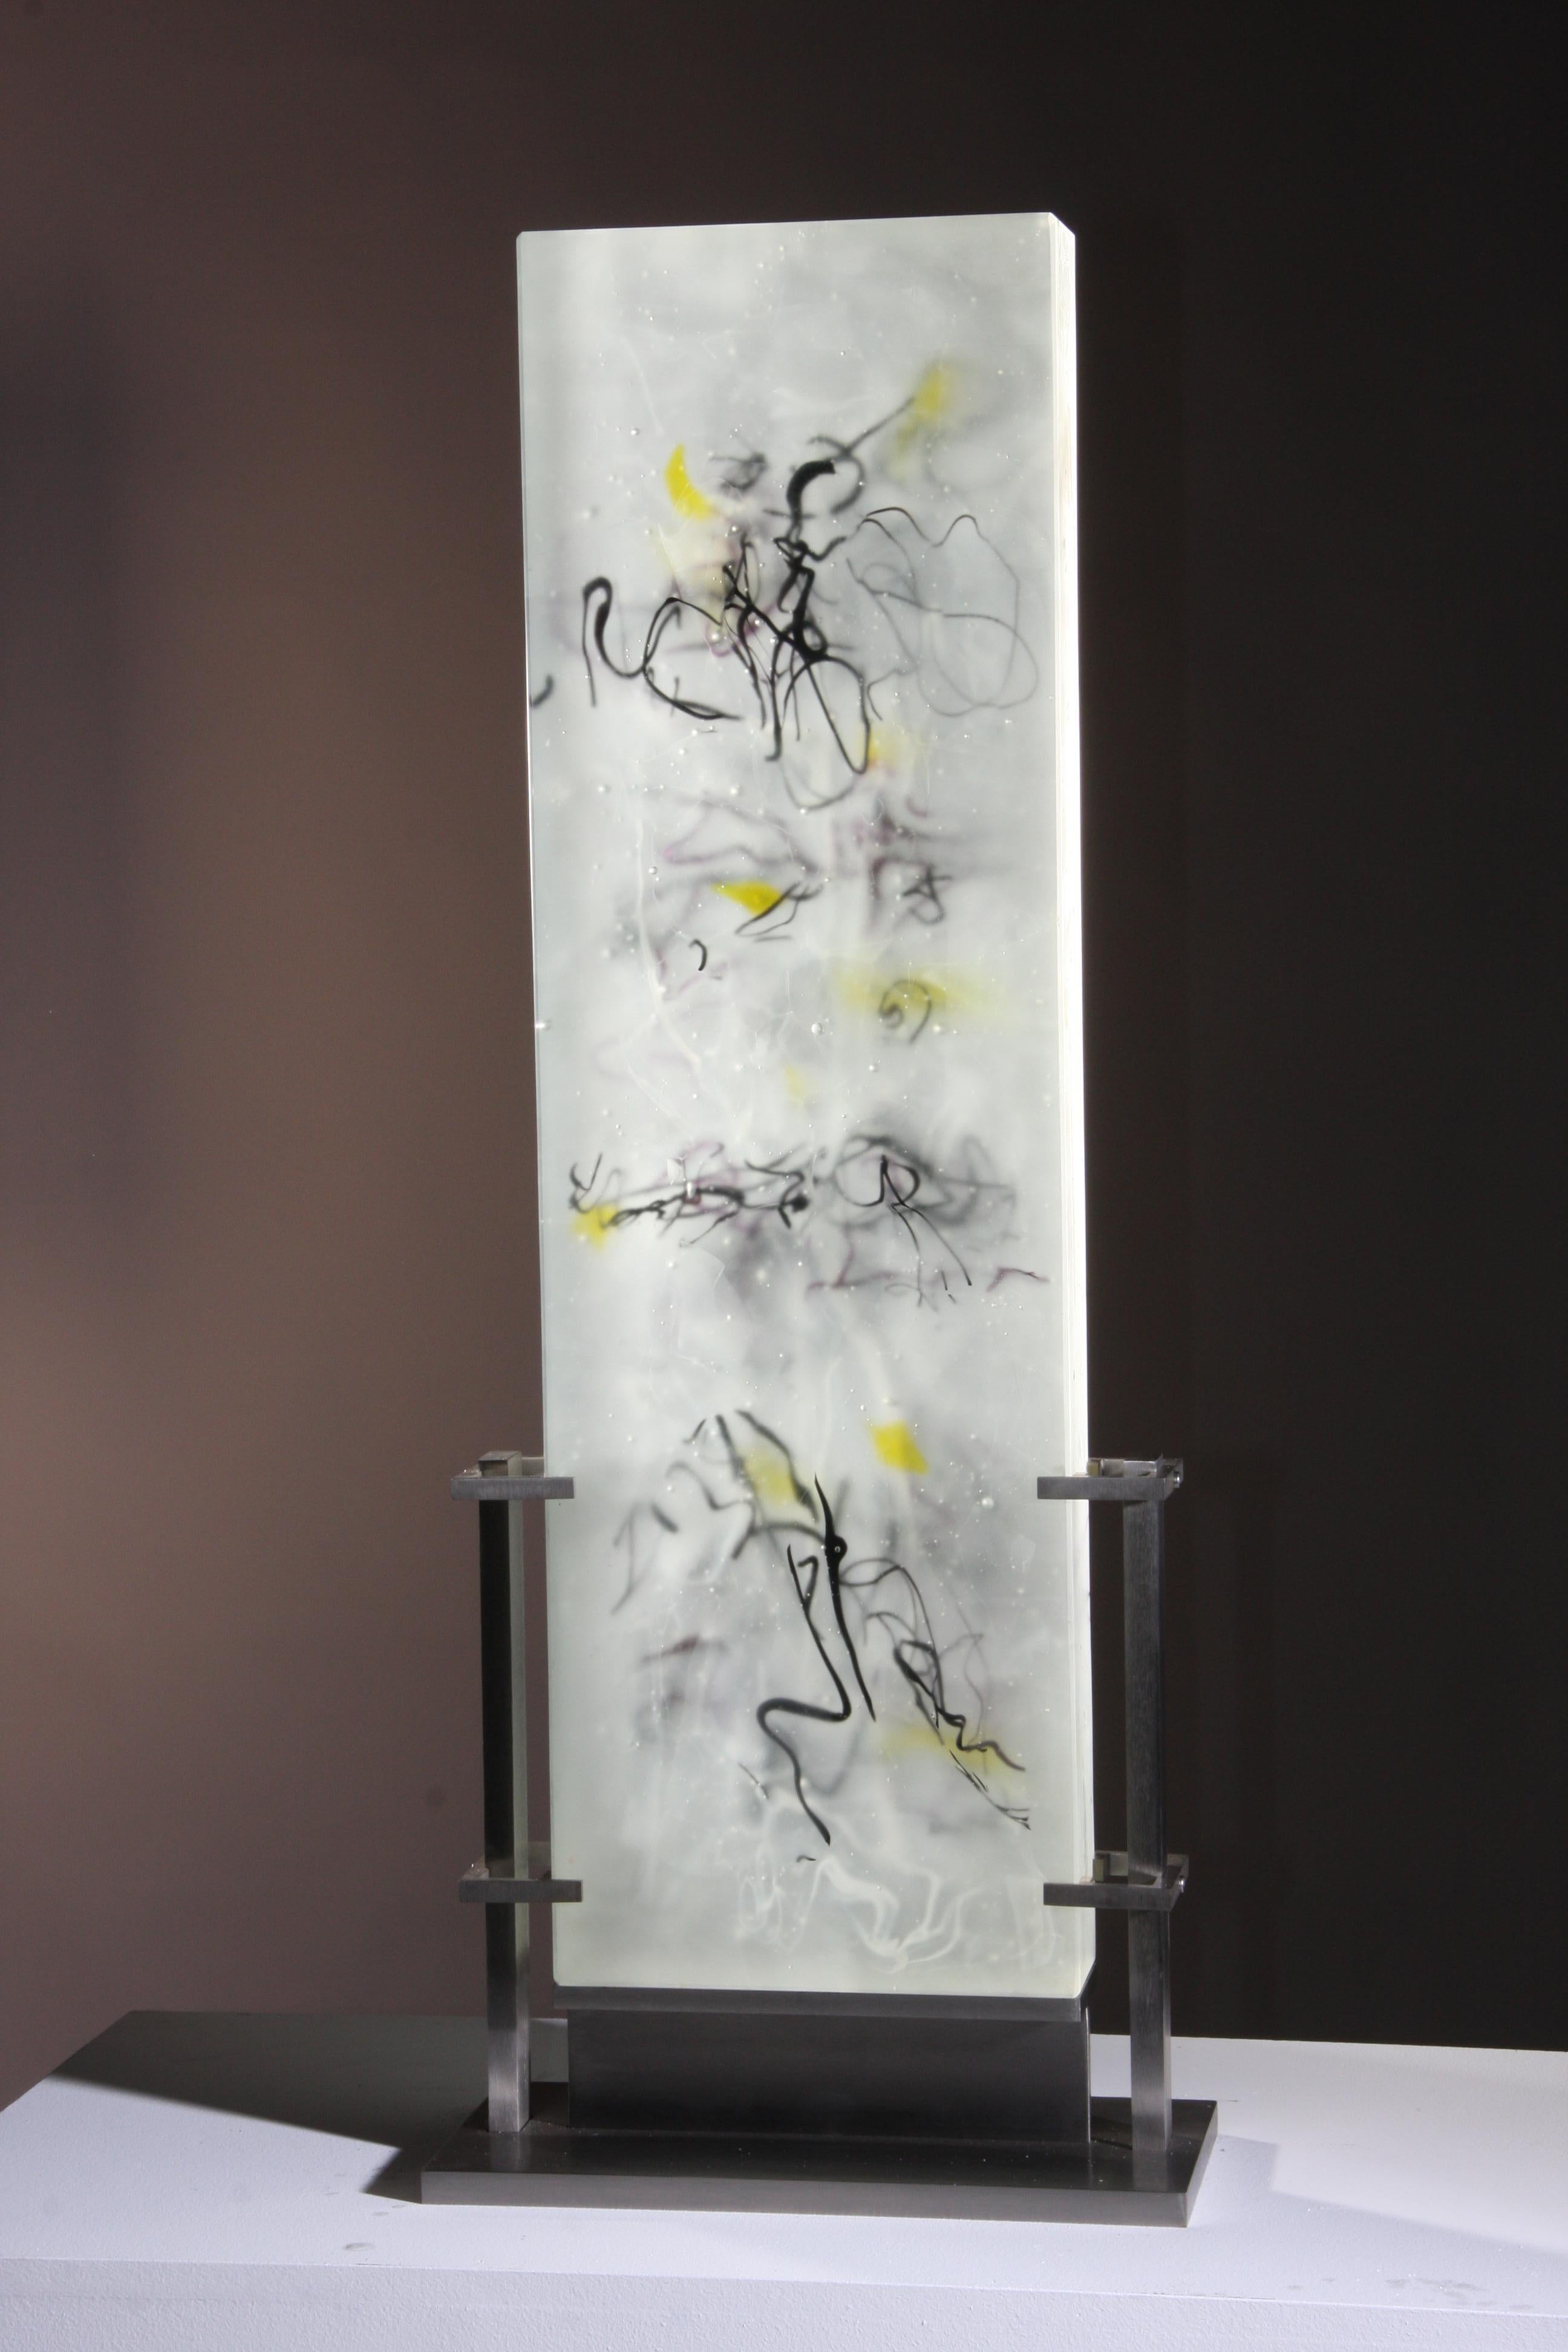 'Kulaykili' is a contemporary abstract cast glass sculpture by David Ruth from his Darfur series. It features painterly brushstroke formations in glass called trails. These trails are in colors of black and yellow. Trails are created through rolling